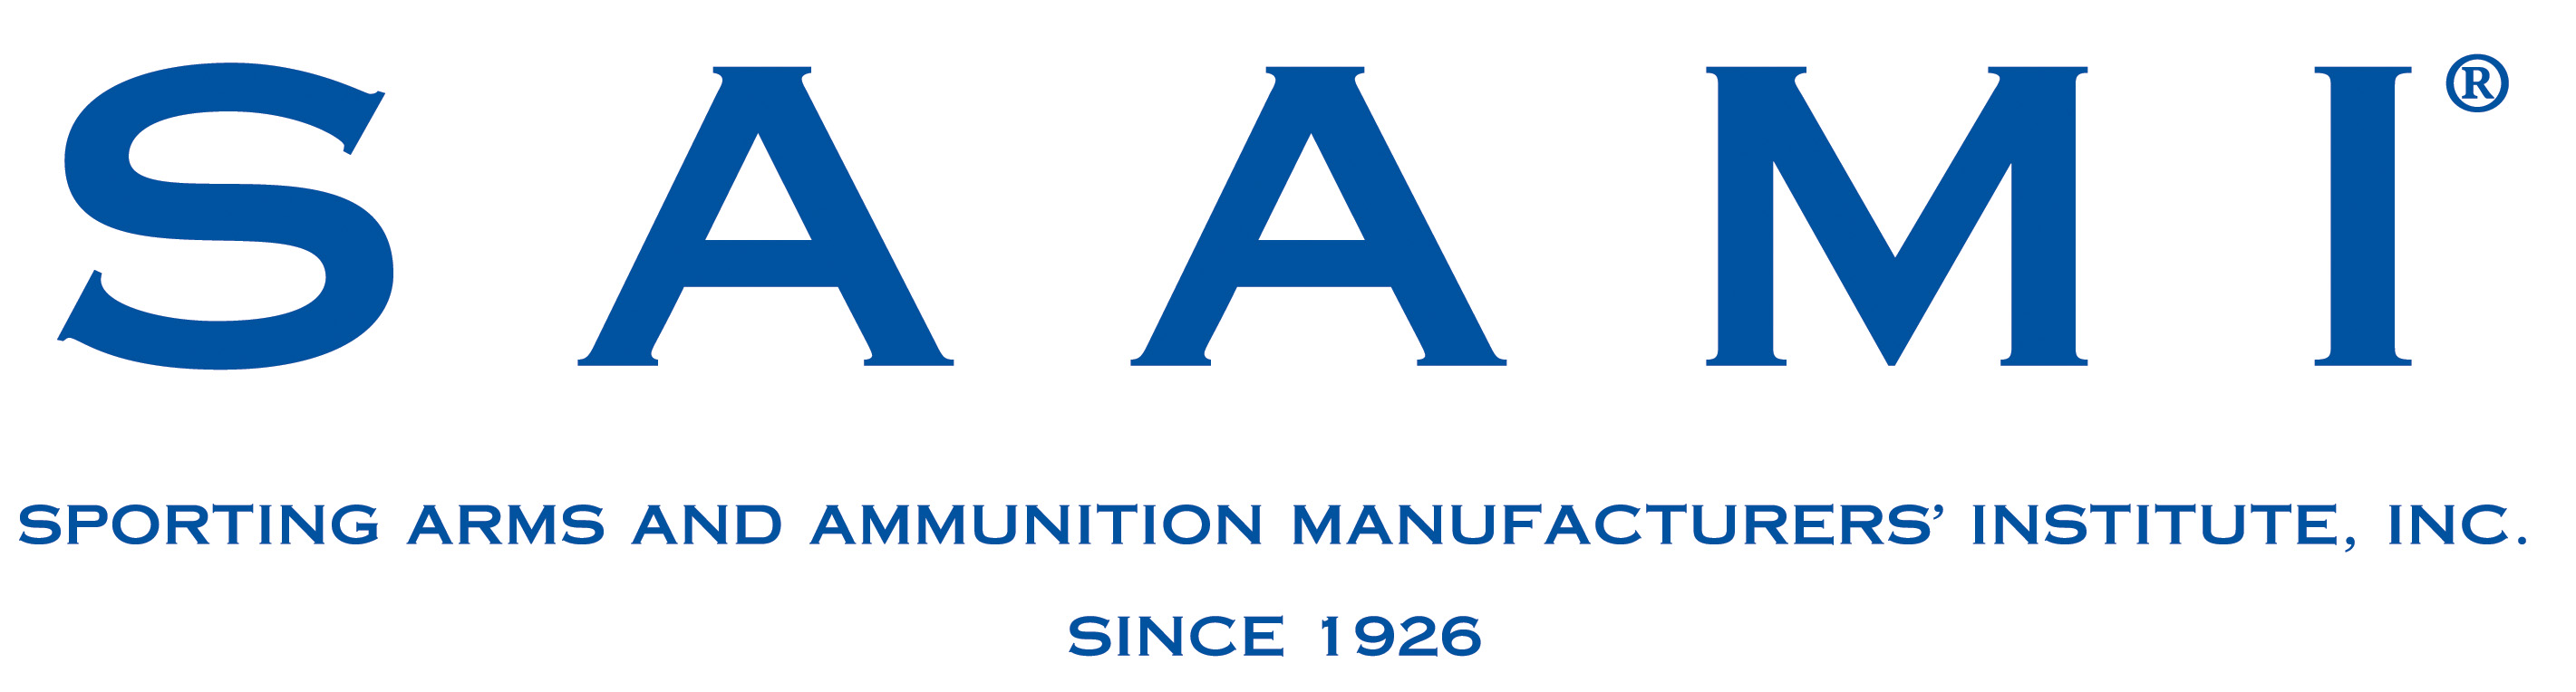 Sporting Arms and Ammunition Manufacturer's Institute, Inc.